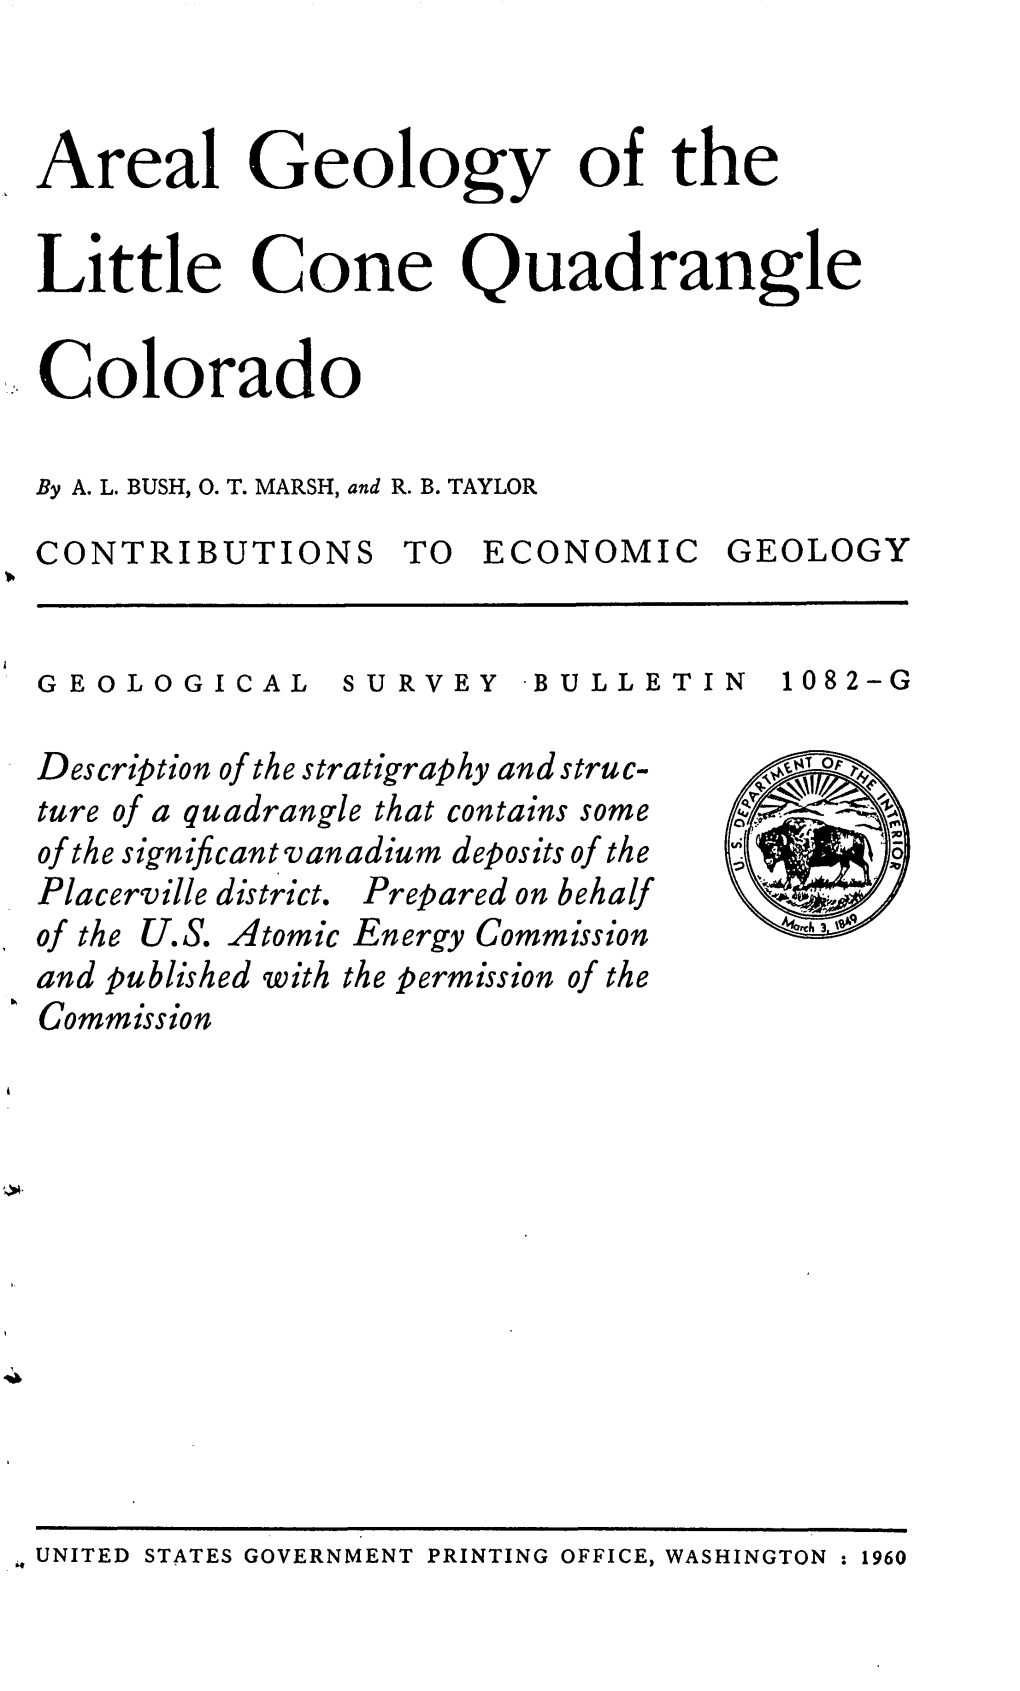 Areal Geology of the Little Cone Quadrangle Colorado